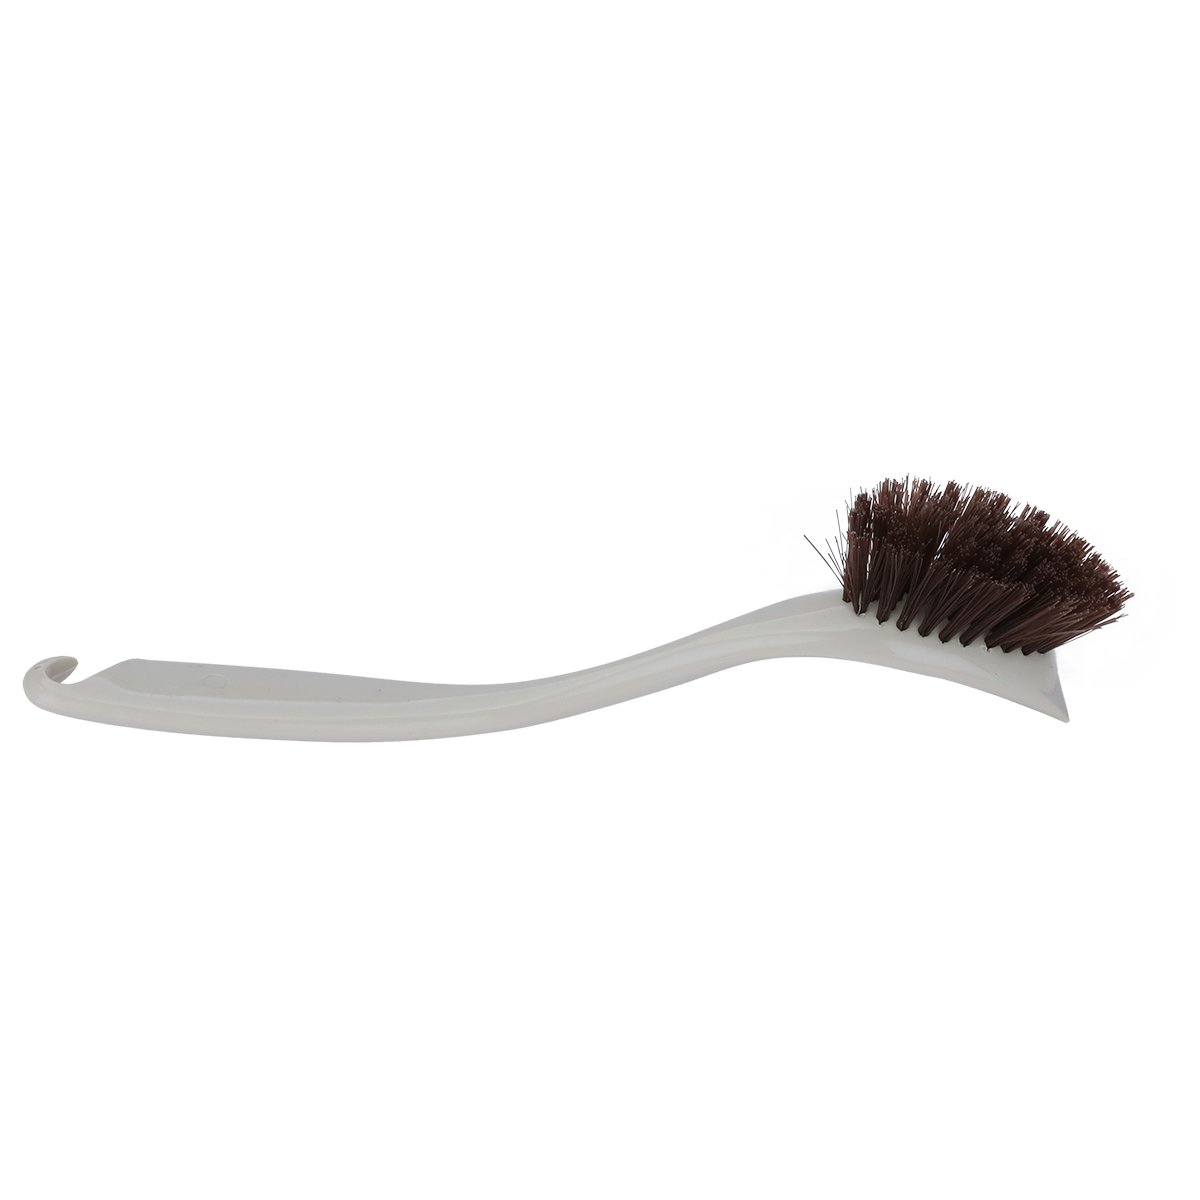 JANDEL Dish Brush, Scrub Brush, Dish Scrubber, Cleaning Brush, Cleaning  Products, Cast Iron Scrubber, Scrub Brush for Cleaning 